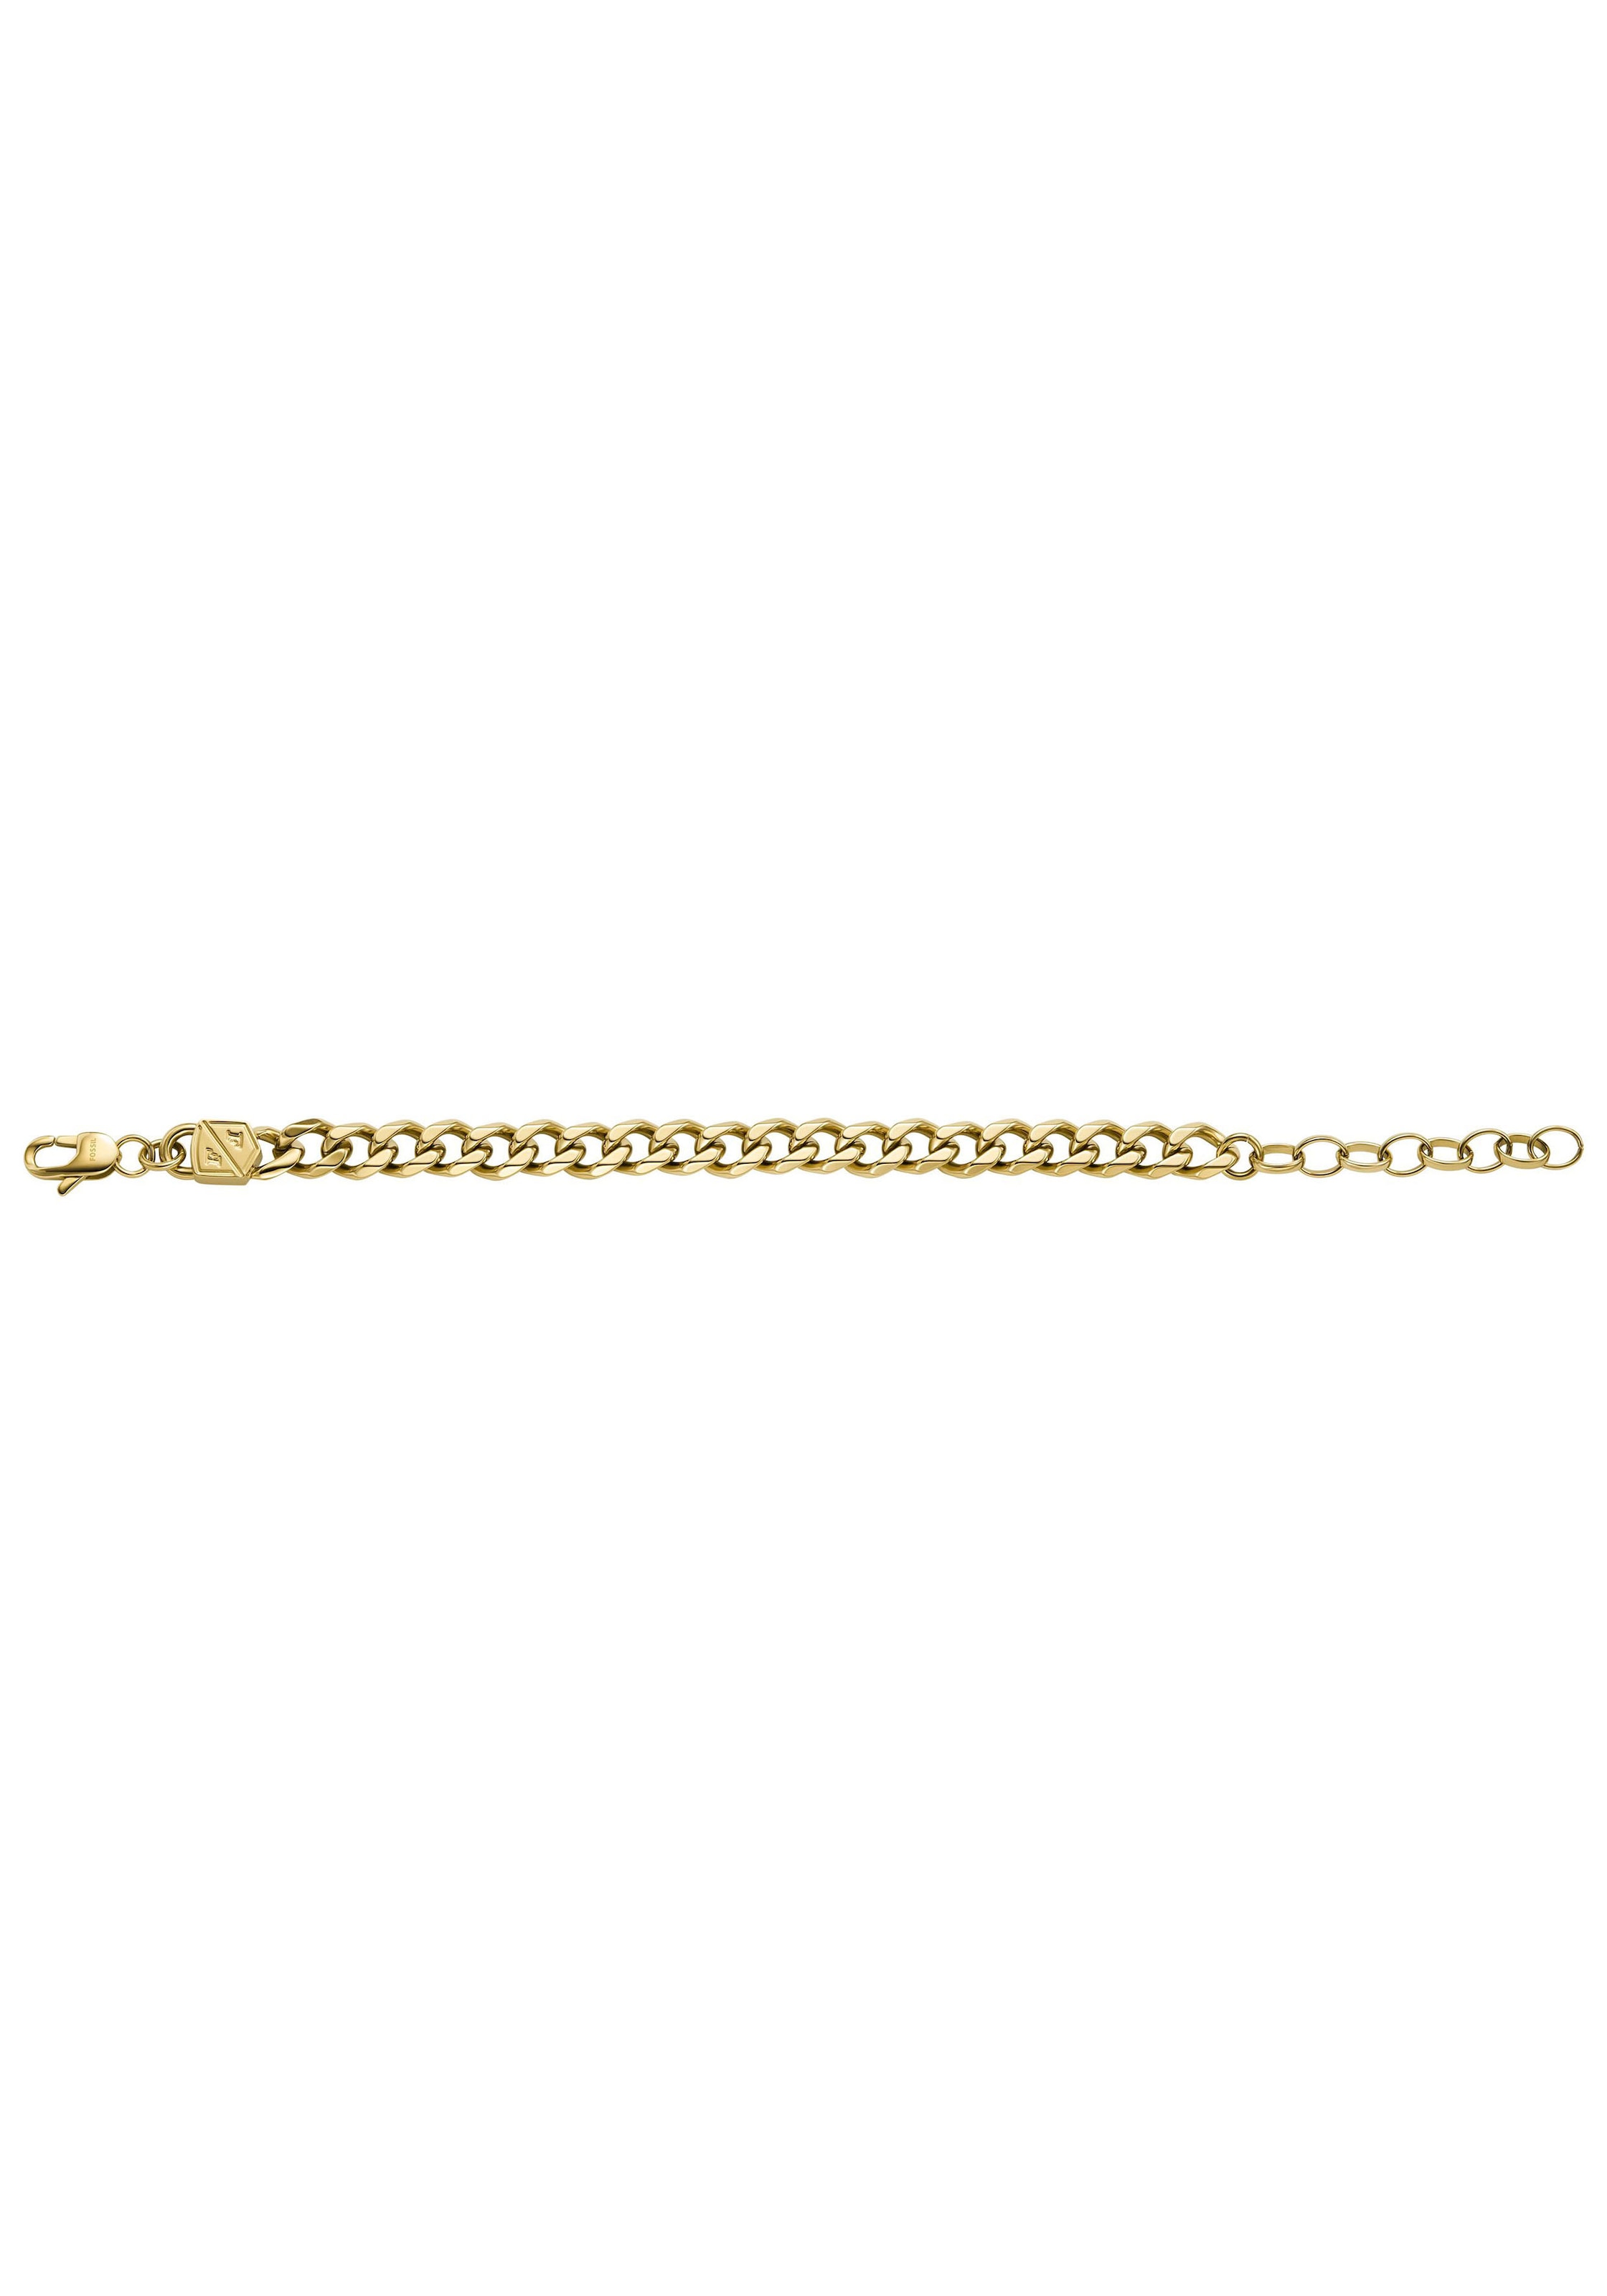 Fossil Edelstahlarmband JF04634001«, JF04616710, »JEWELRY Shop OTTO Edelstahl BOLD CHAINS, Online JF04615040, im